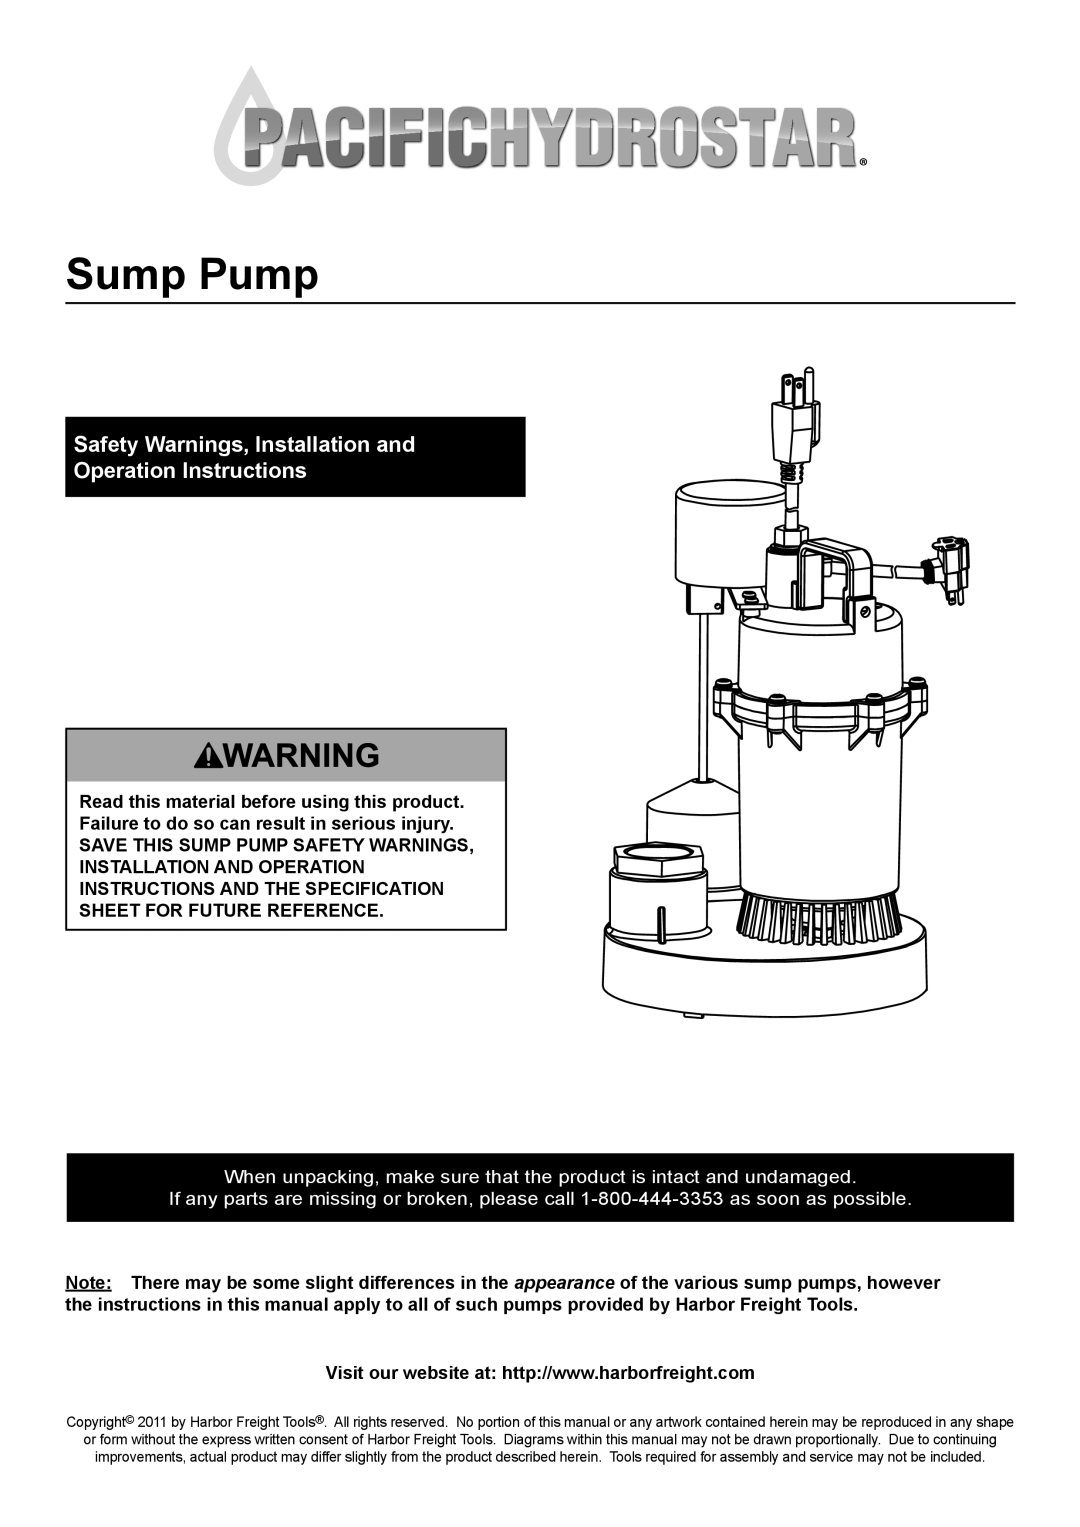 Harbor Freight Tools 68476 specifications Sump Pump, Safety Warnings, Installation and Operation Instructions 